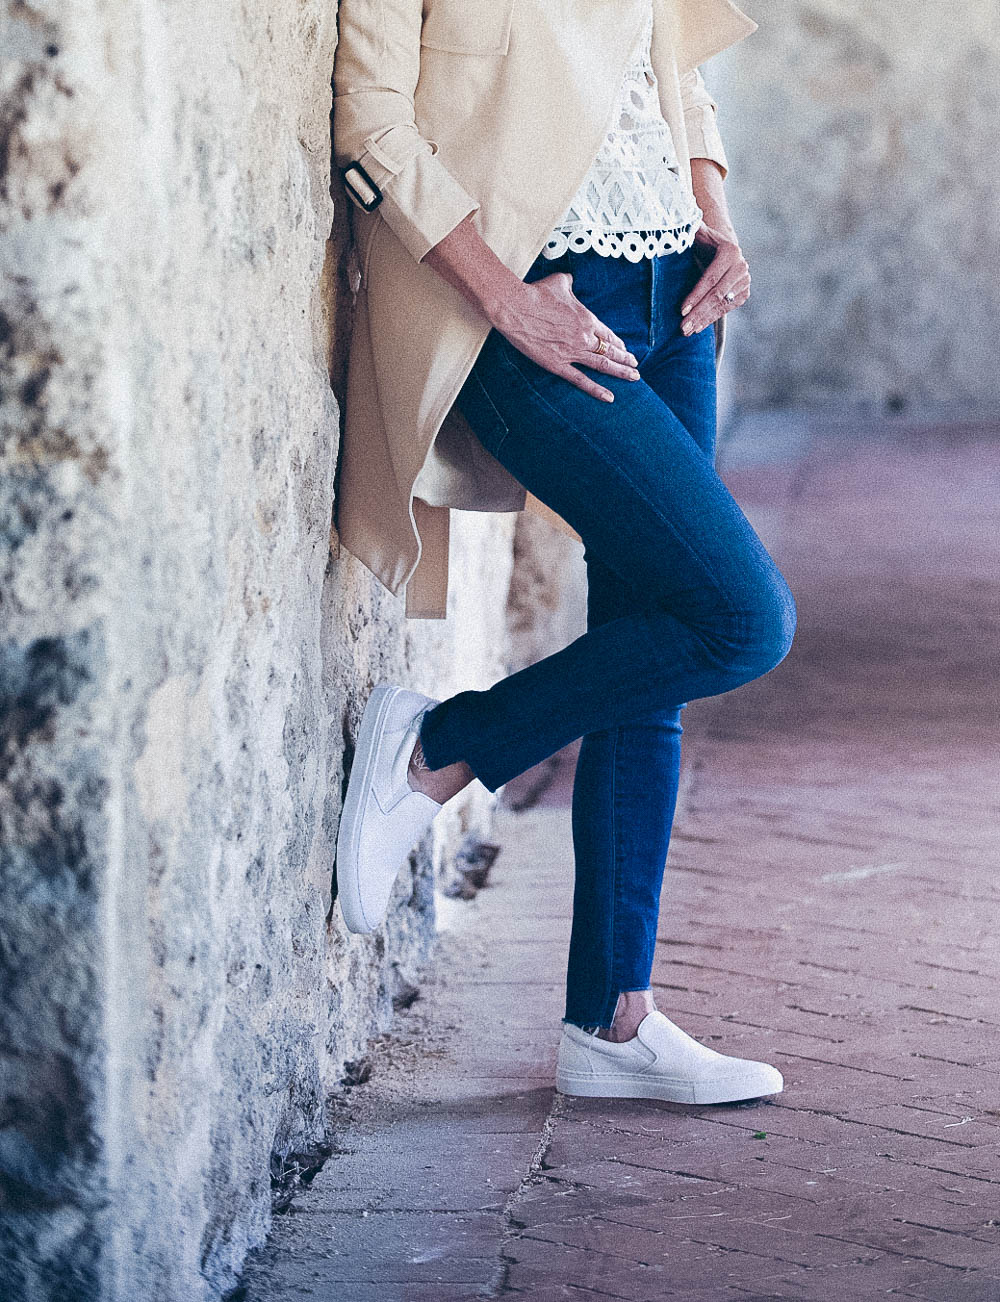 White sneakers slip on by Greats brand, worn 2 ways, including jeans and a one-shoulder top and a beige trench and white eyelet top, featured on Erin Busbee, of BusbeeStyle, fashion blogger and youtuber